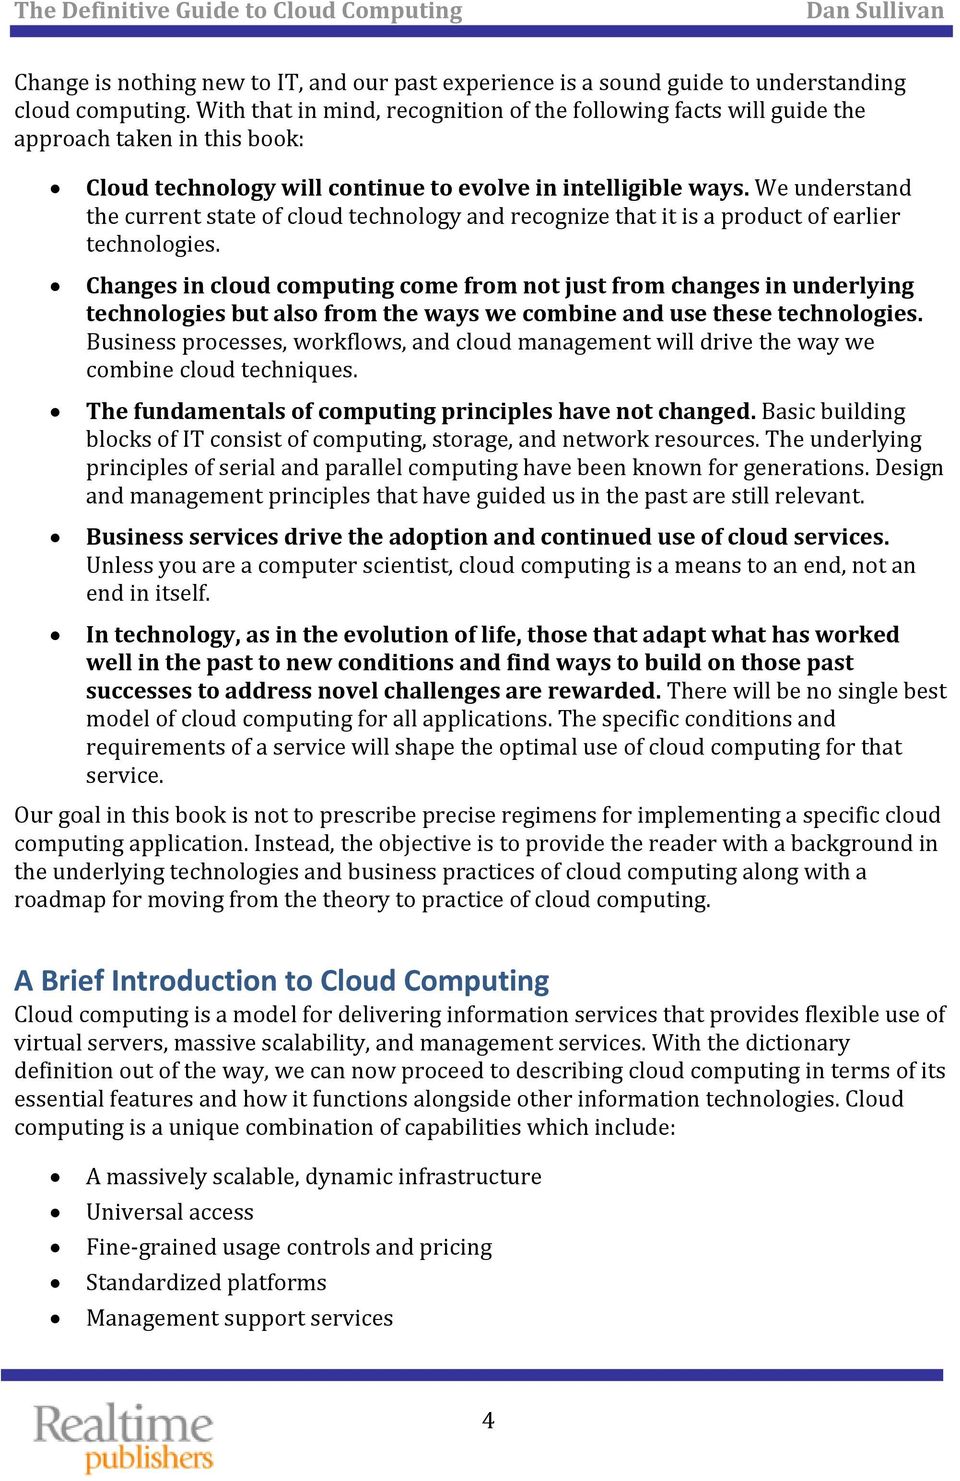 We understand the current state of cloud technology and recognize that it is a product of earlier technologies.